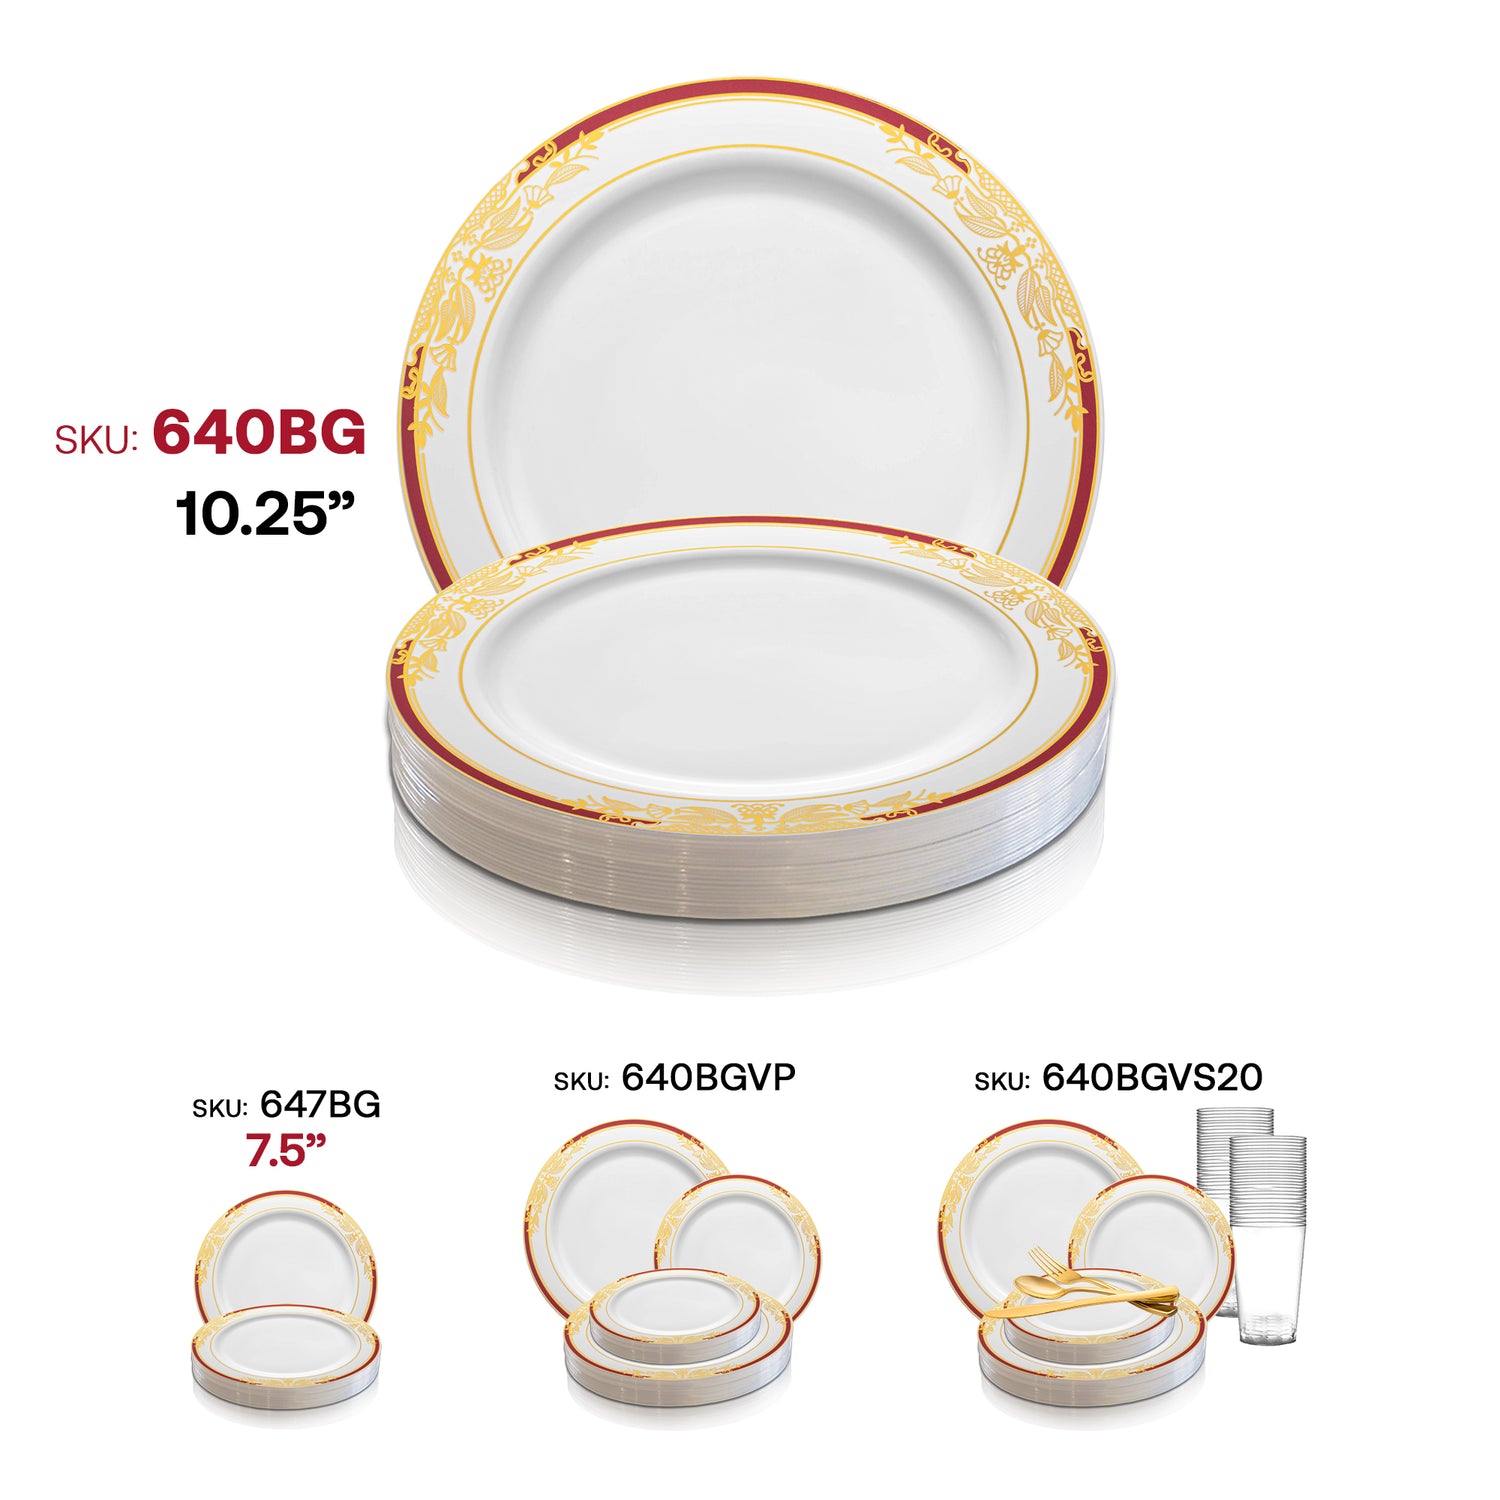 White with Burgundy and Gold Harmony Rim Plastic Dinner Plates (10.25") SKU | The Kaya Collection